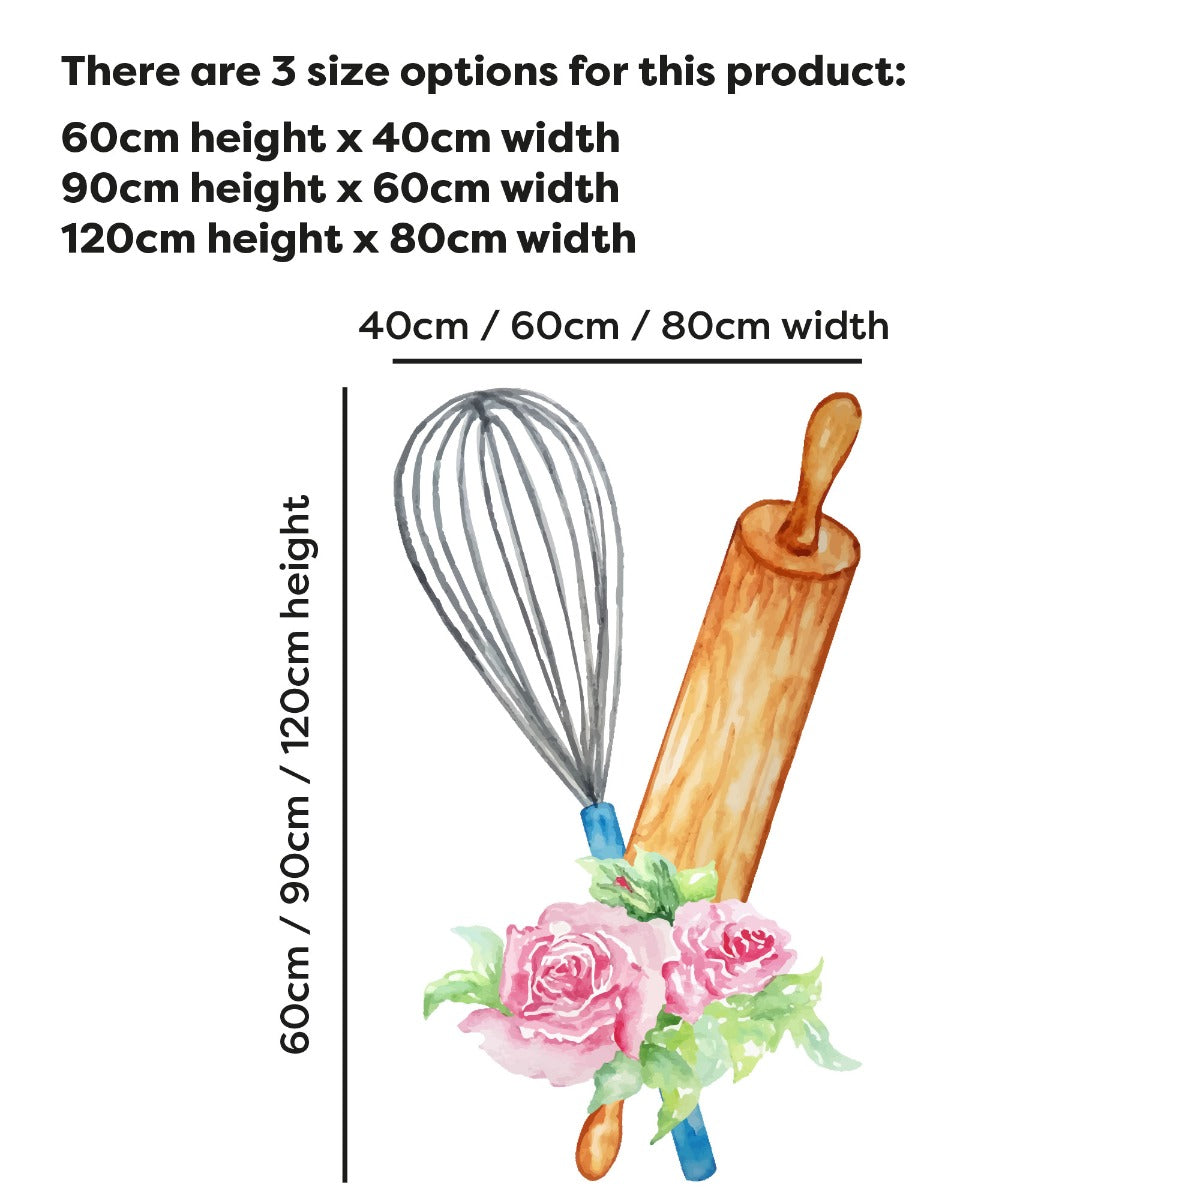 Kitchen Wall Sticker - Whisk and Rolling Pin Flower